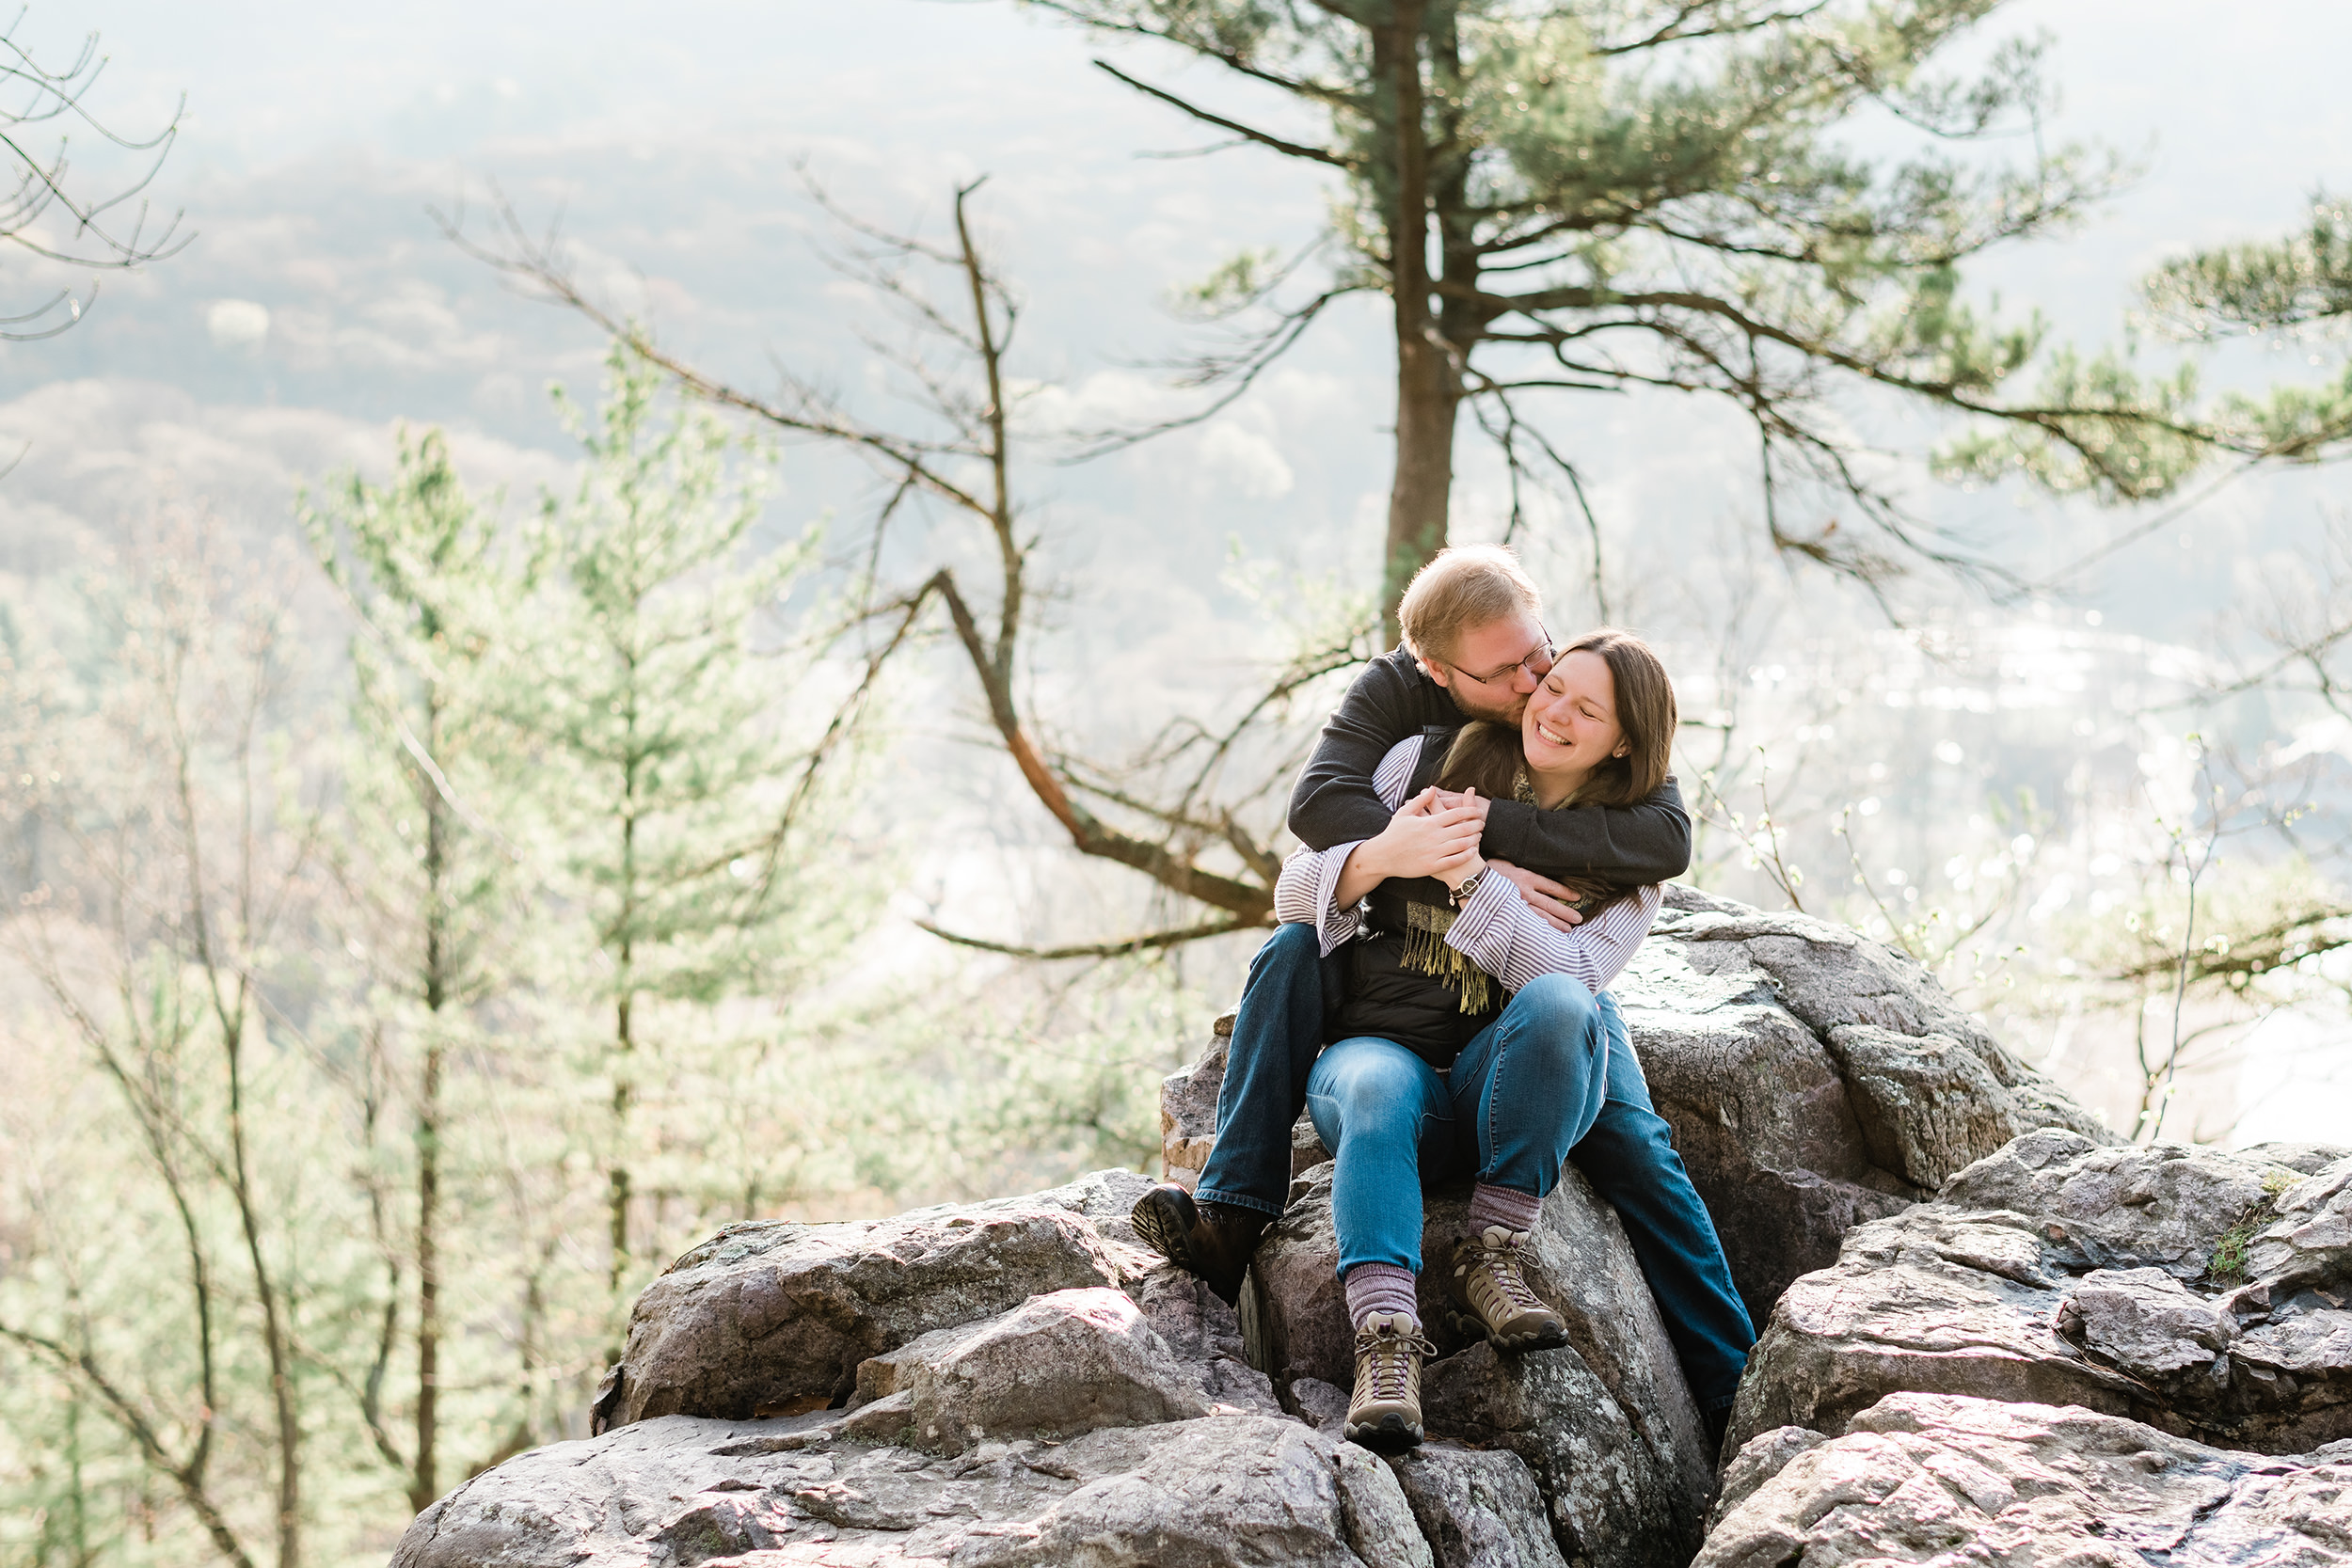 Engaged couple snuggling on a pile of rocks